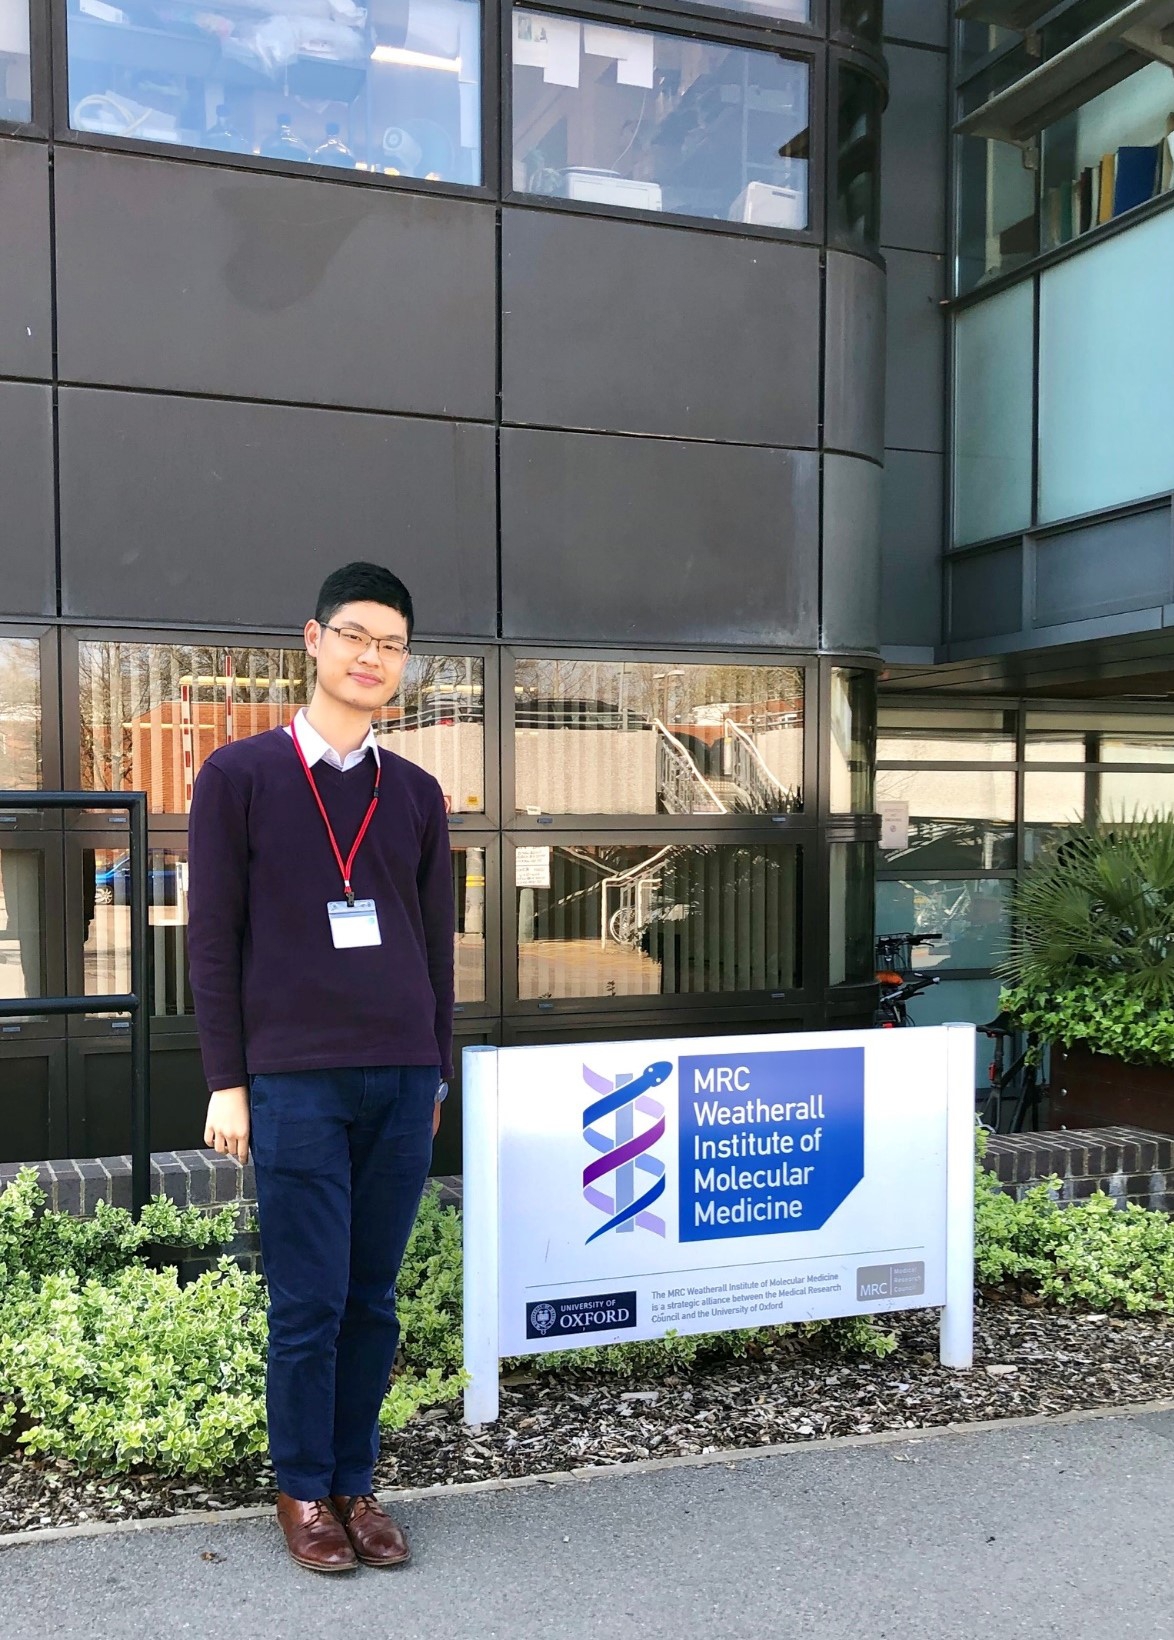 Timothy Tipoe is returning to the University of Oxford to study Clinical Medicine this year after his attachment at the Weatherall Institute of Molecular Medicine in Oxford during his undergraduate studies.